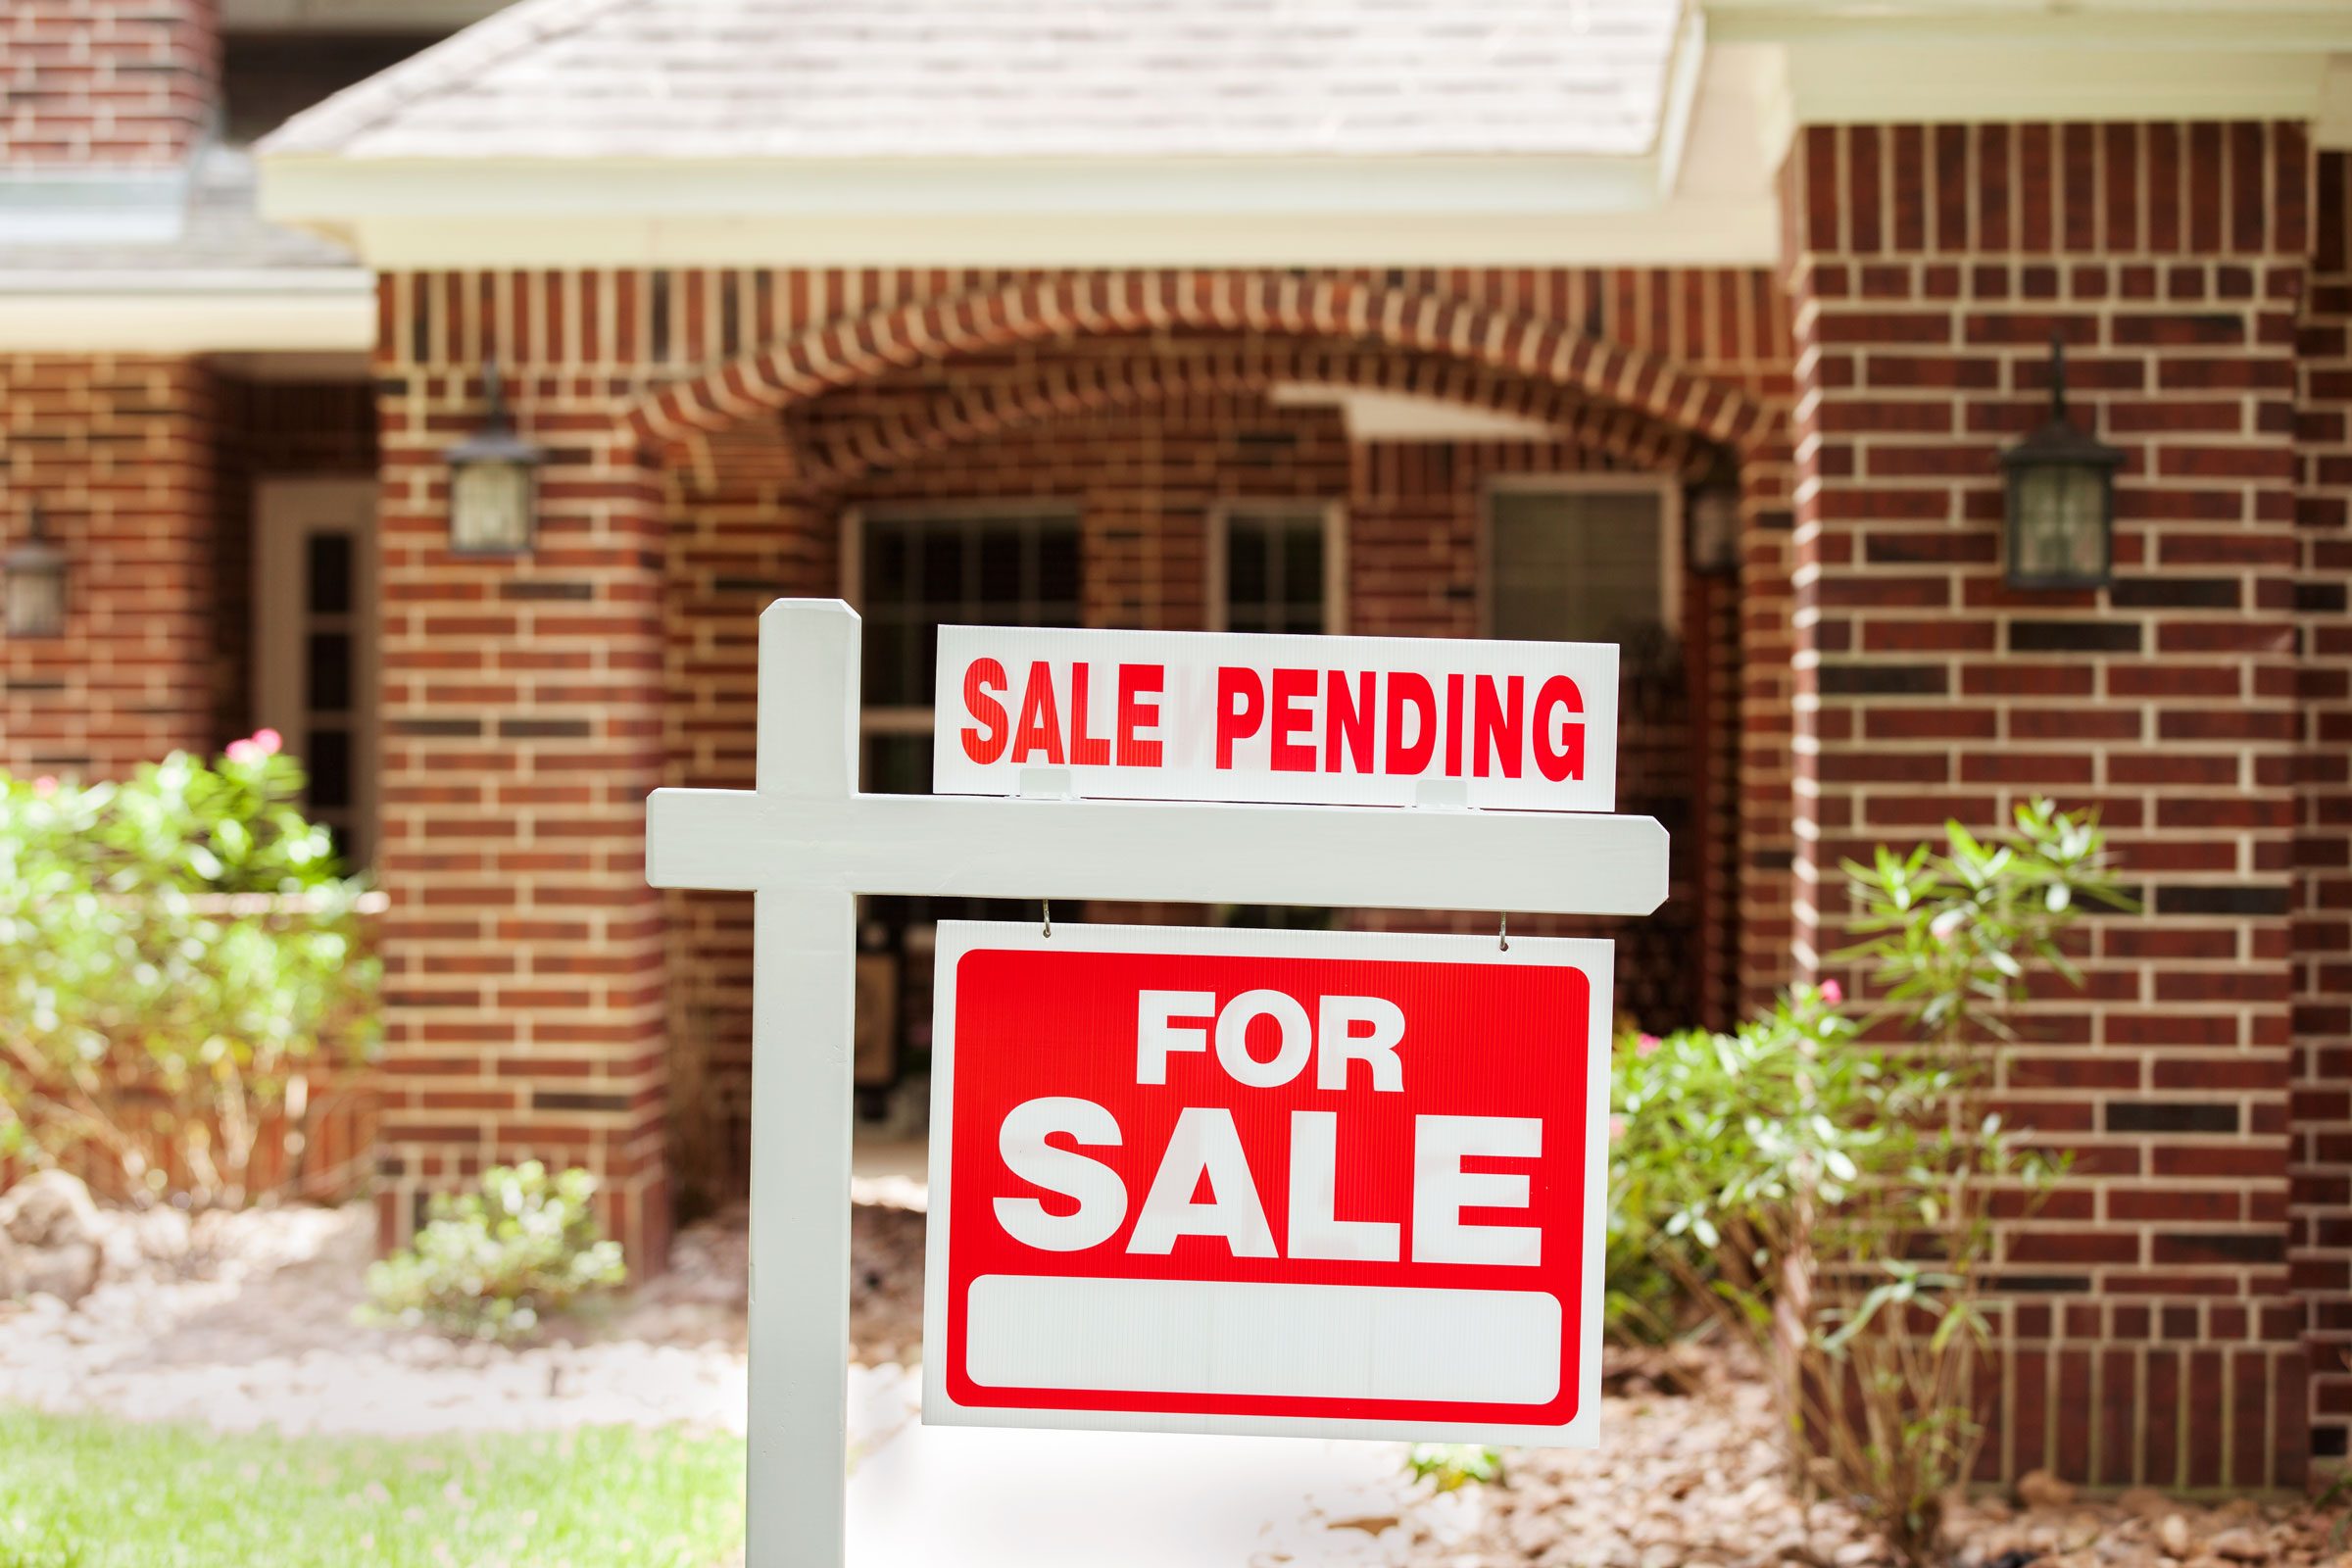 sale pending sign in front of a brick house